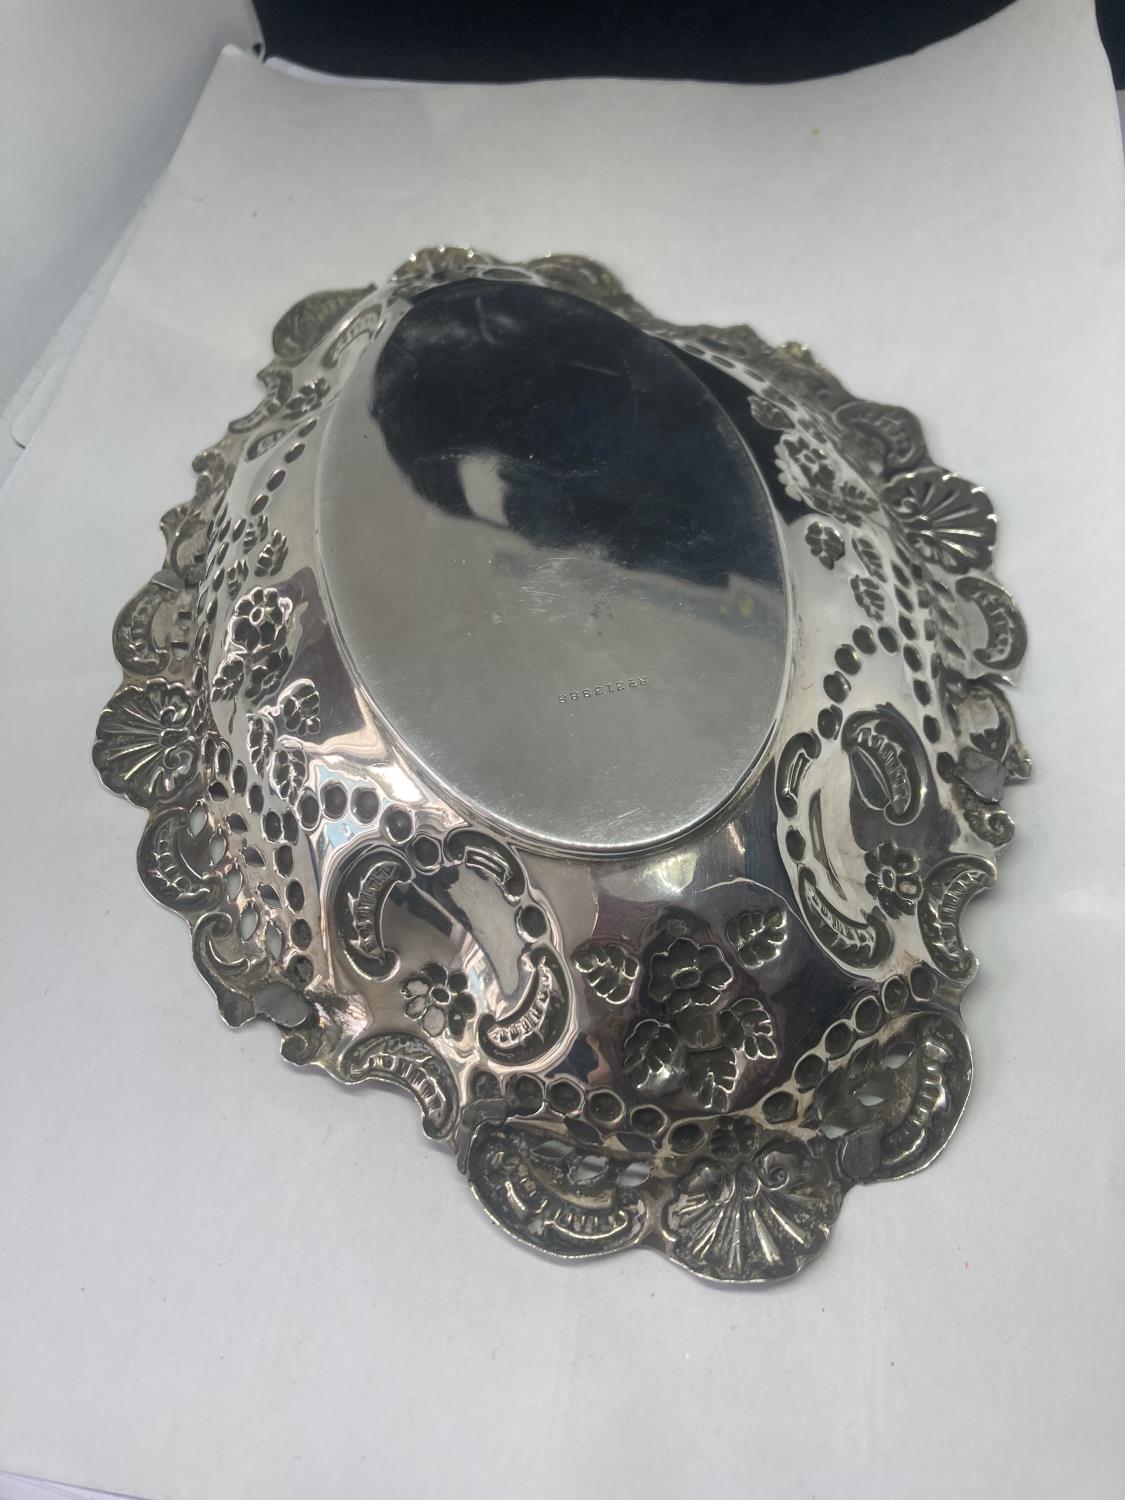 A DECORATIVE HALLMARKED SHEFFIELD SILVER DISH GROSS WEIGHT 124 GRAMS - Image 6 of 10